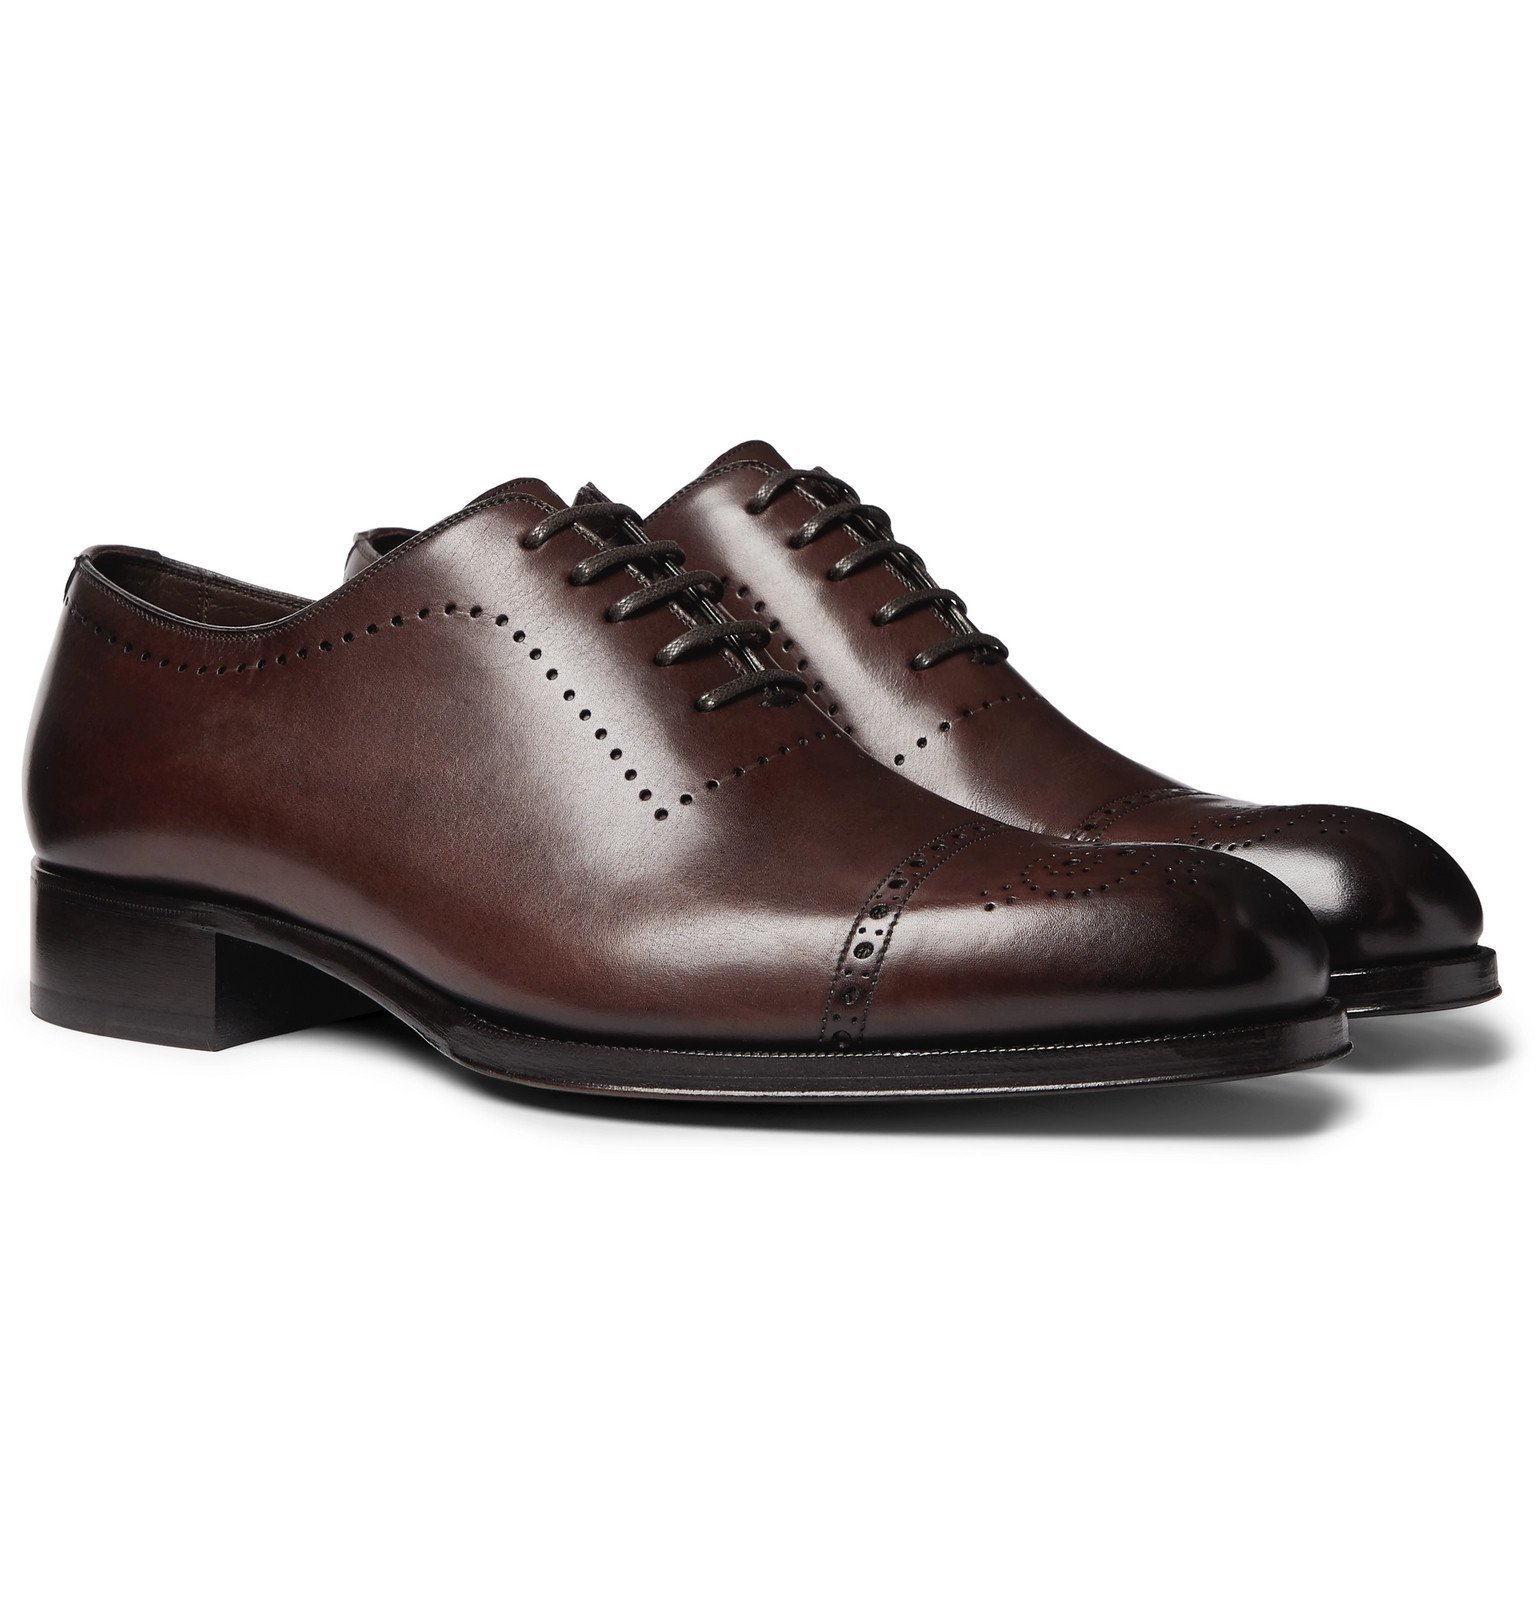 TOM FORD - Edgar Whole-Cut Polished-Leather Brogues - Brown TOM FORD